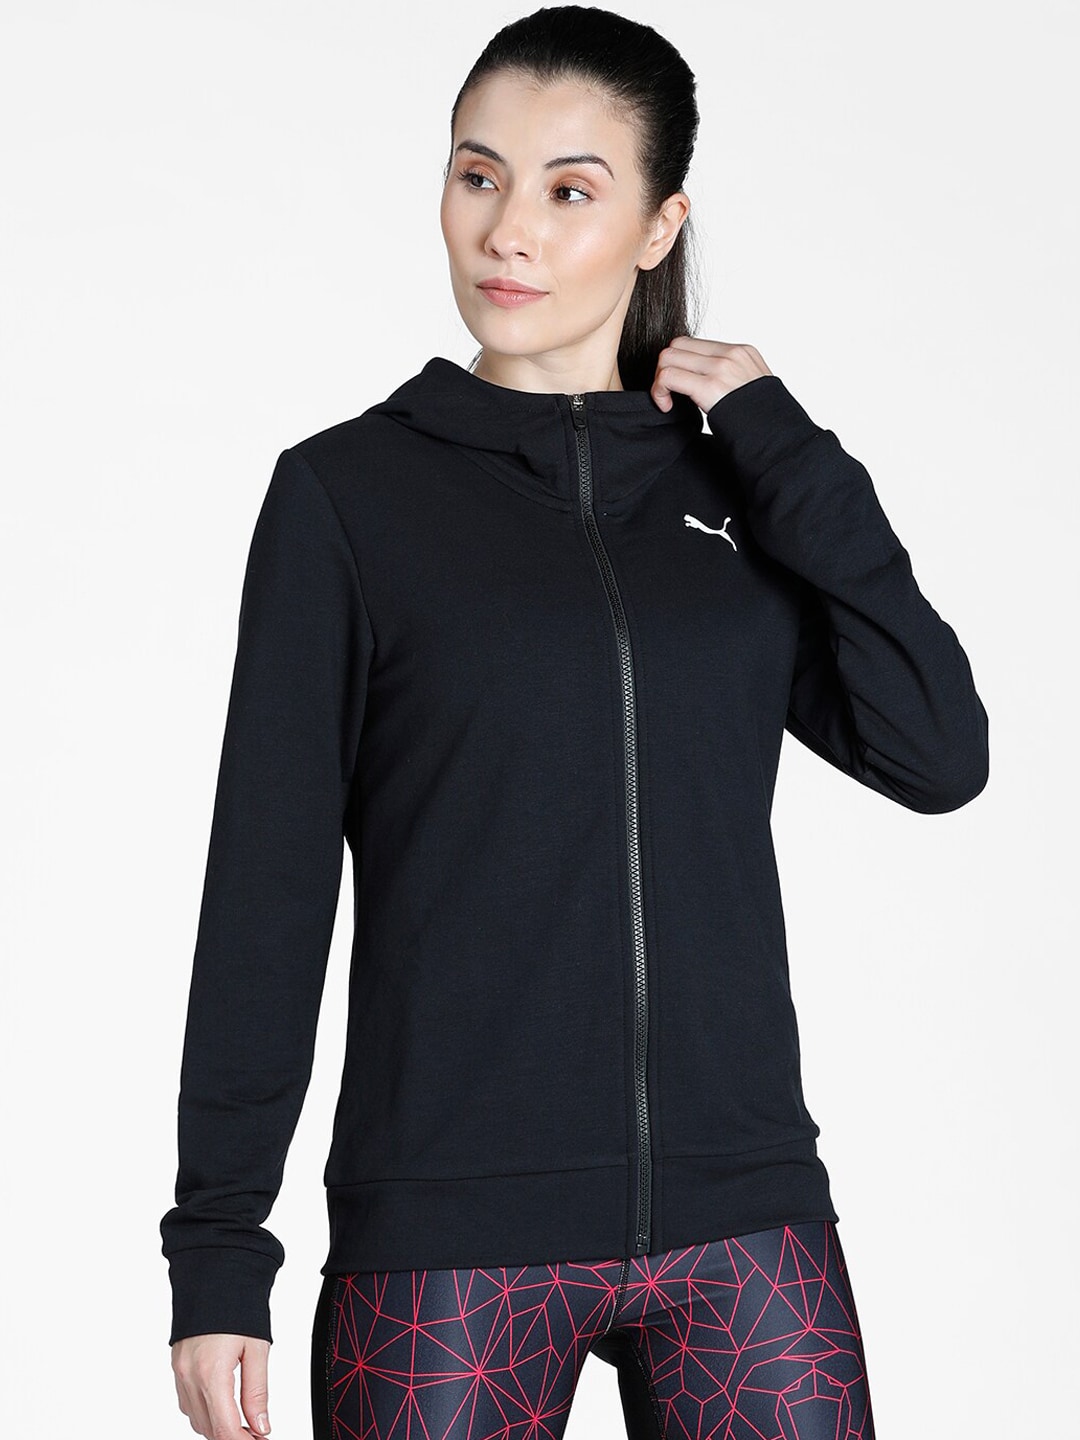 Puma Women Black Sweatshirt with dryCELL Technology Price in India